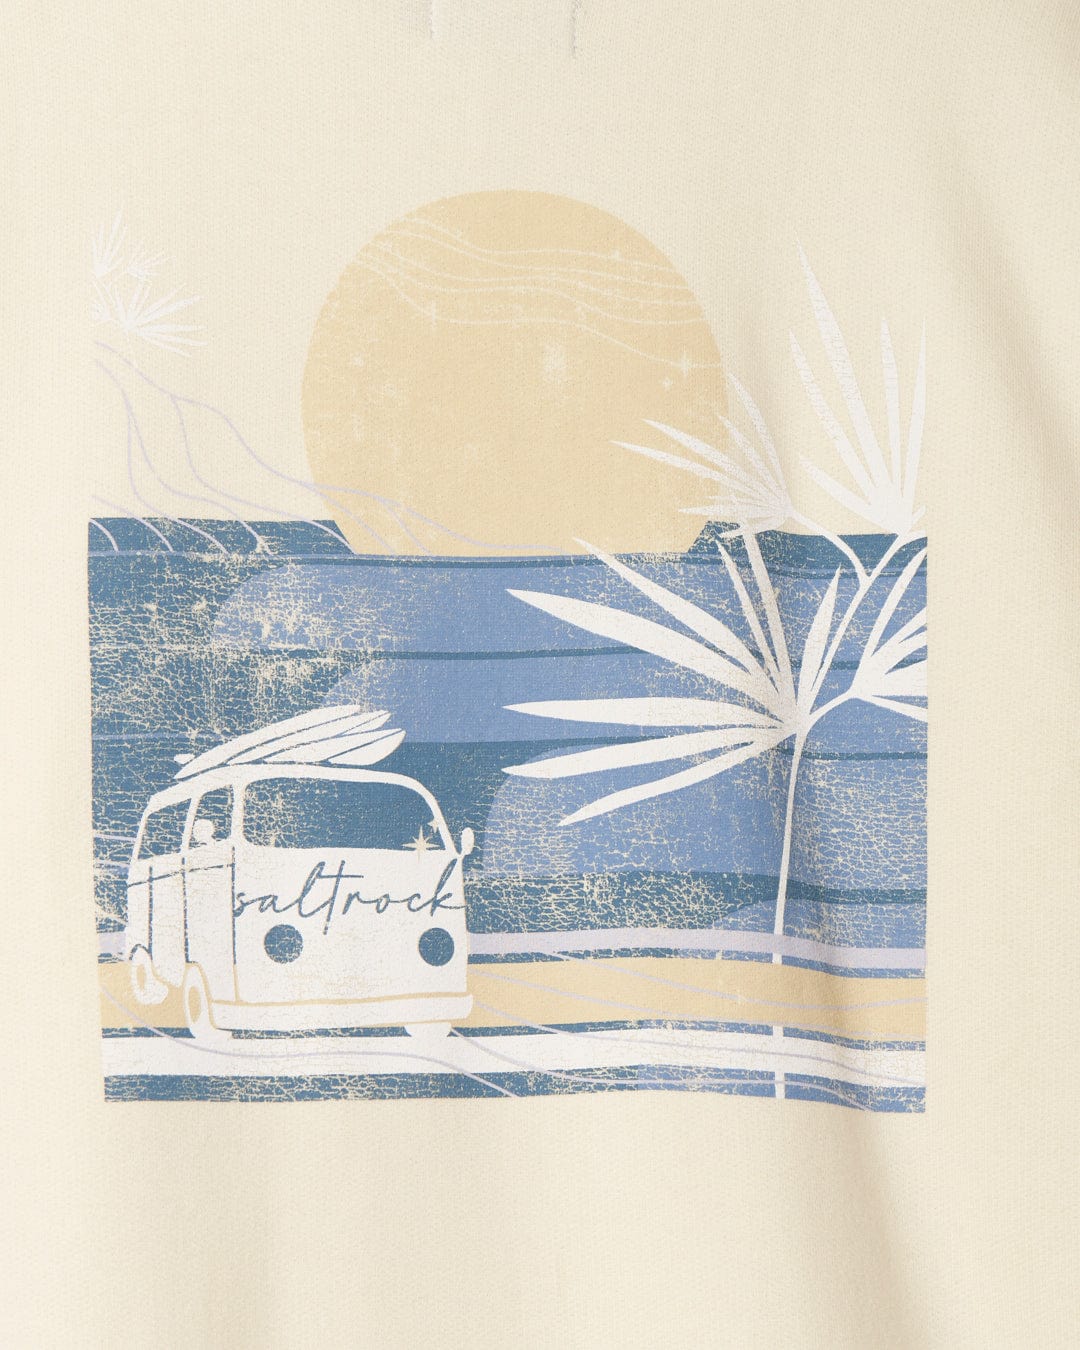 Graphic print of a campervan by the seaside with palm trees and sunset on a Saltrock branded fabric background.